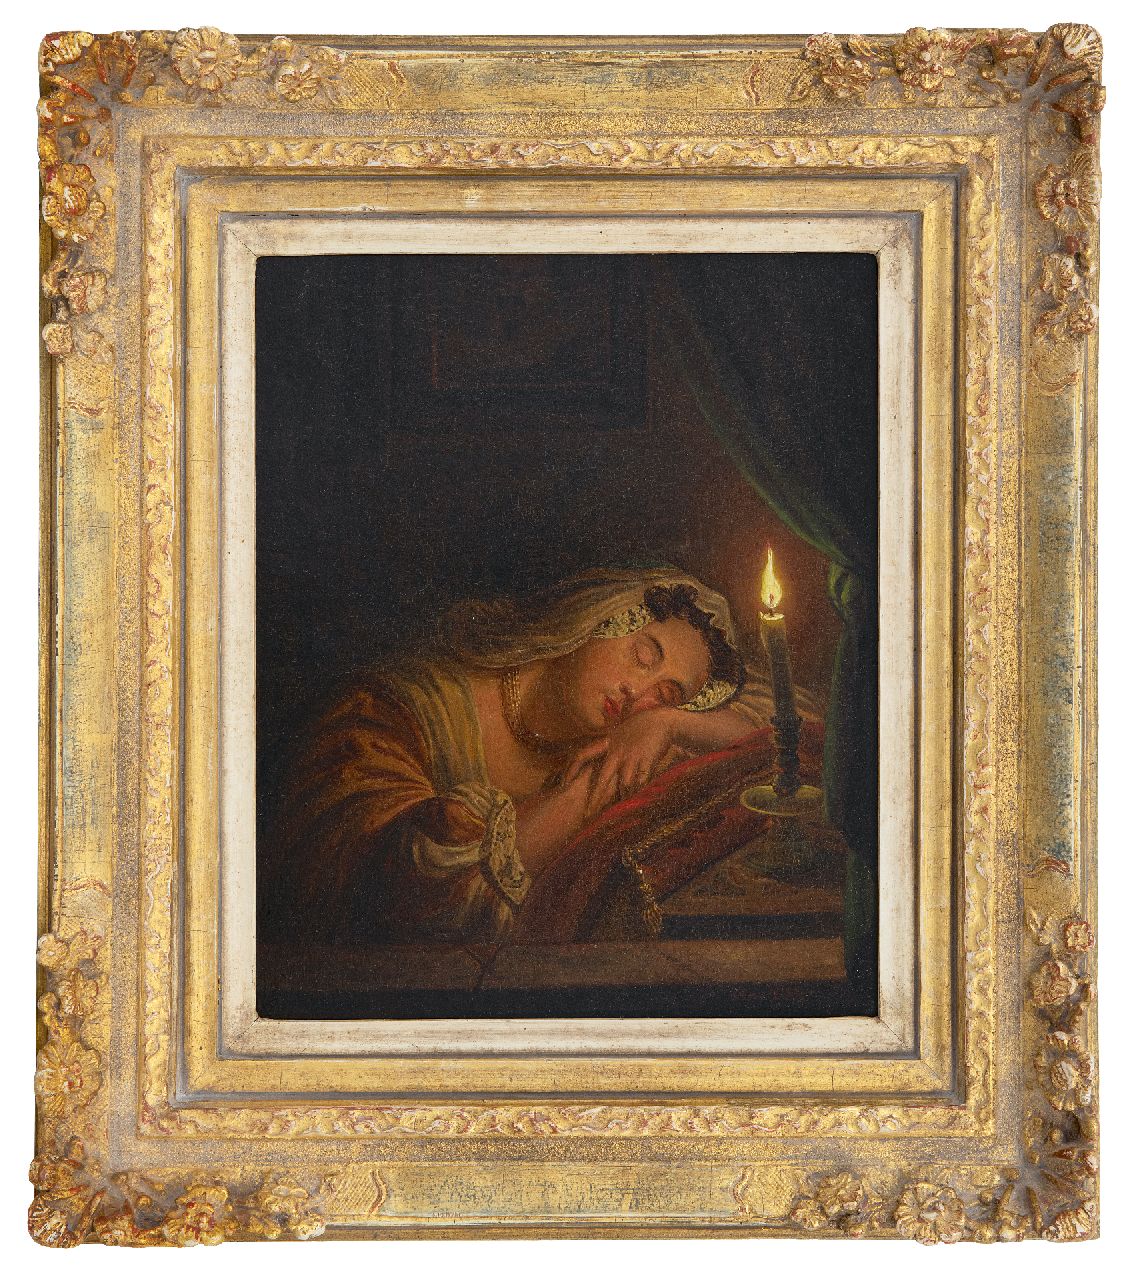 Thans W.  | Willem Thans | Paintings offered for sale | Sleeping woman by candle light, oil on panel 25.6 x 20.2 cm, signed l.r. and dated 1845